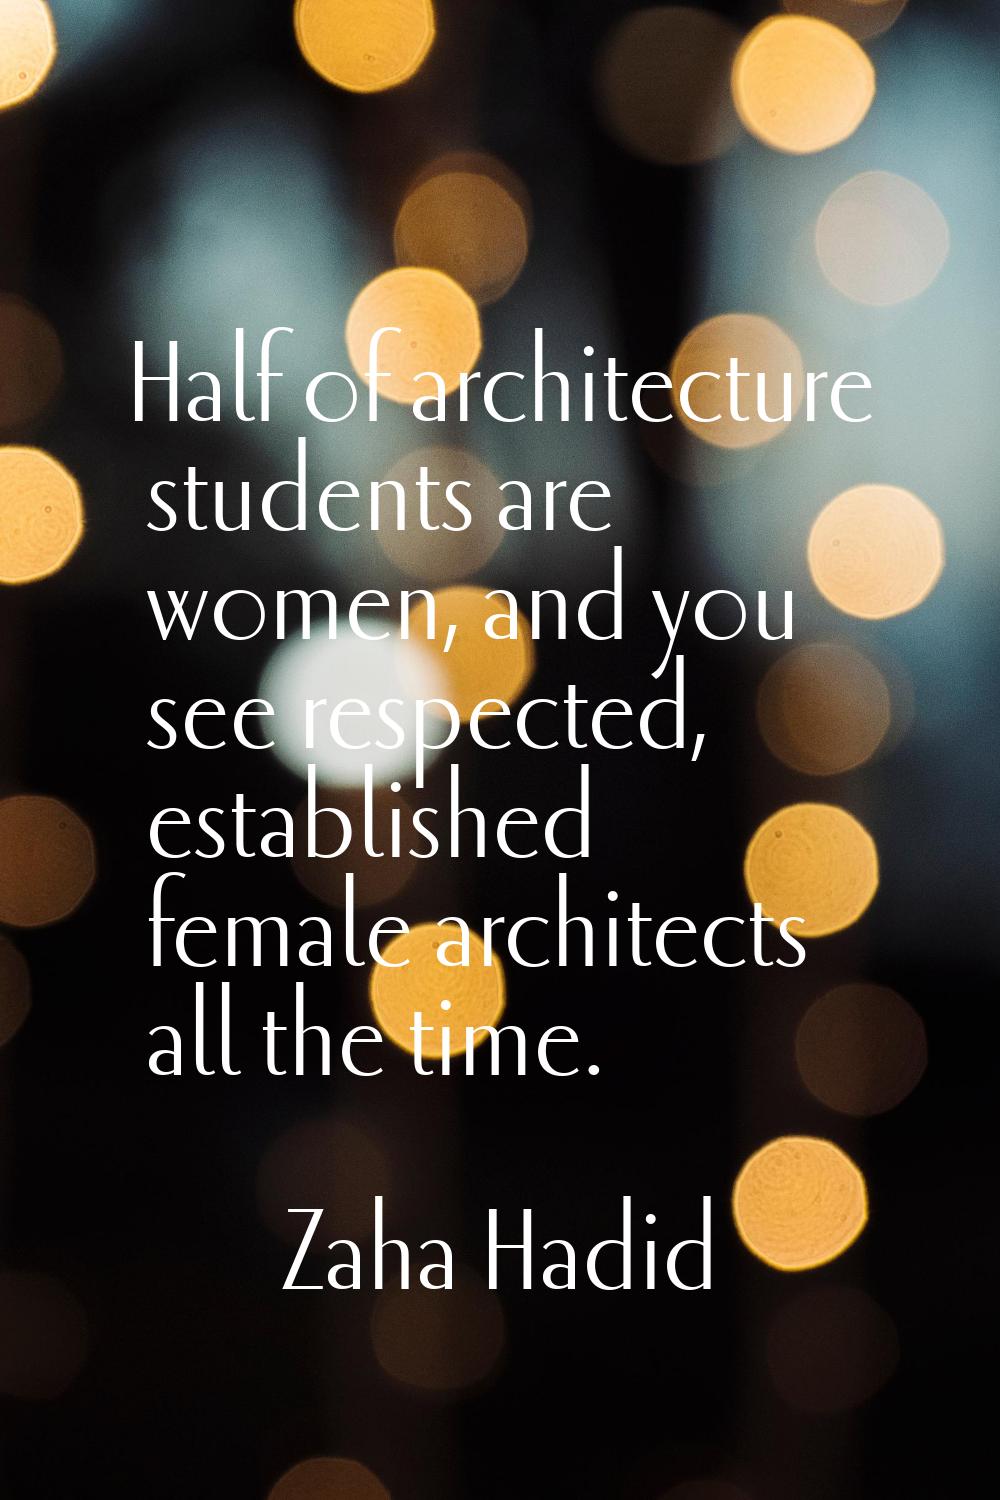 Half of architecture students are women, and you see respected, established female architects all t